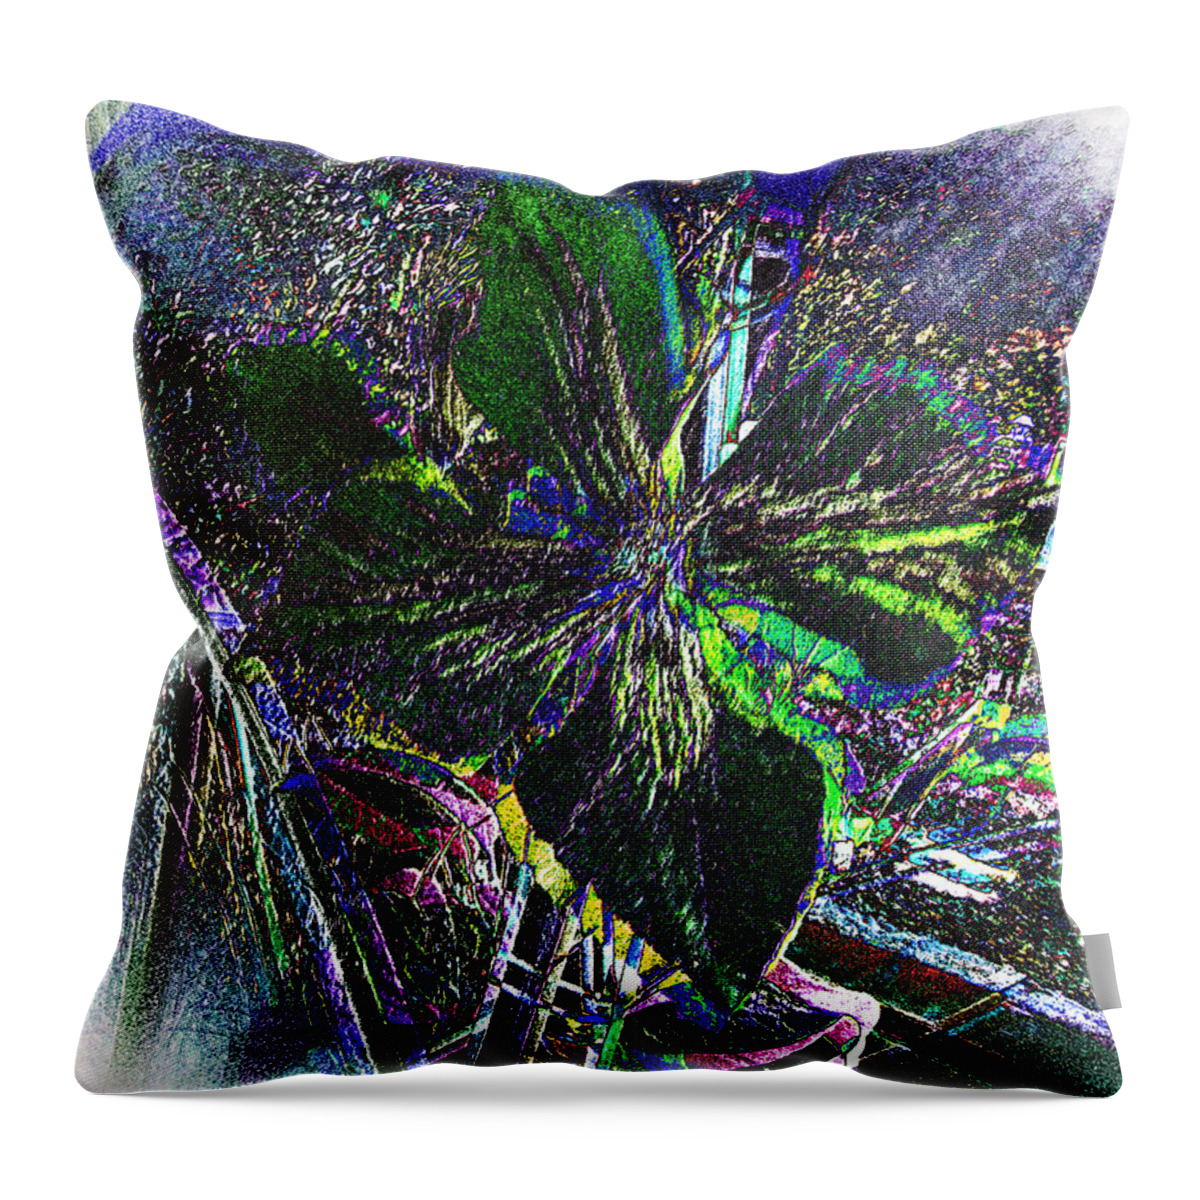 Flower Throw Pillow featuring the photograph Colorful by Donna Brown